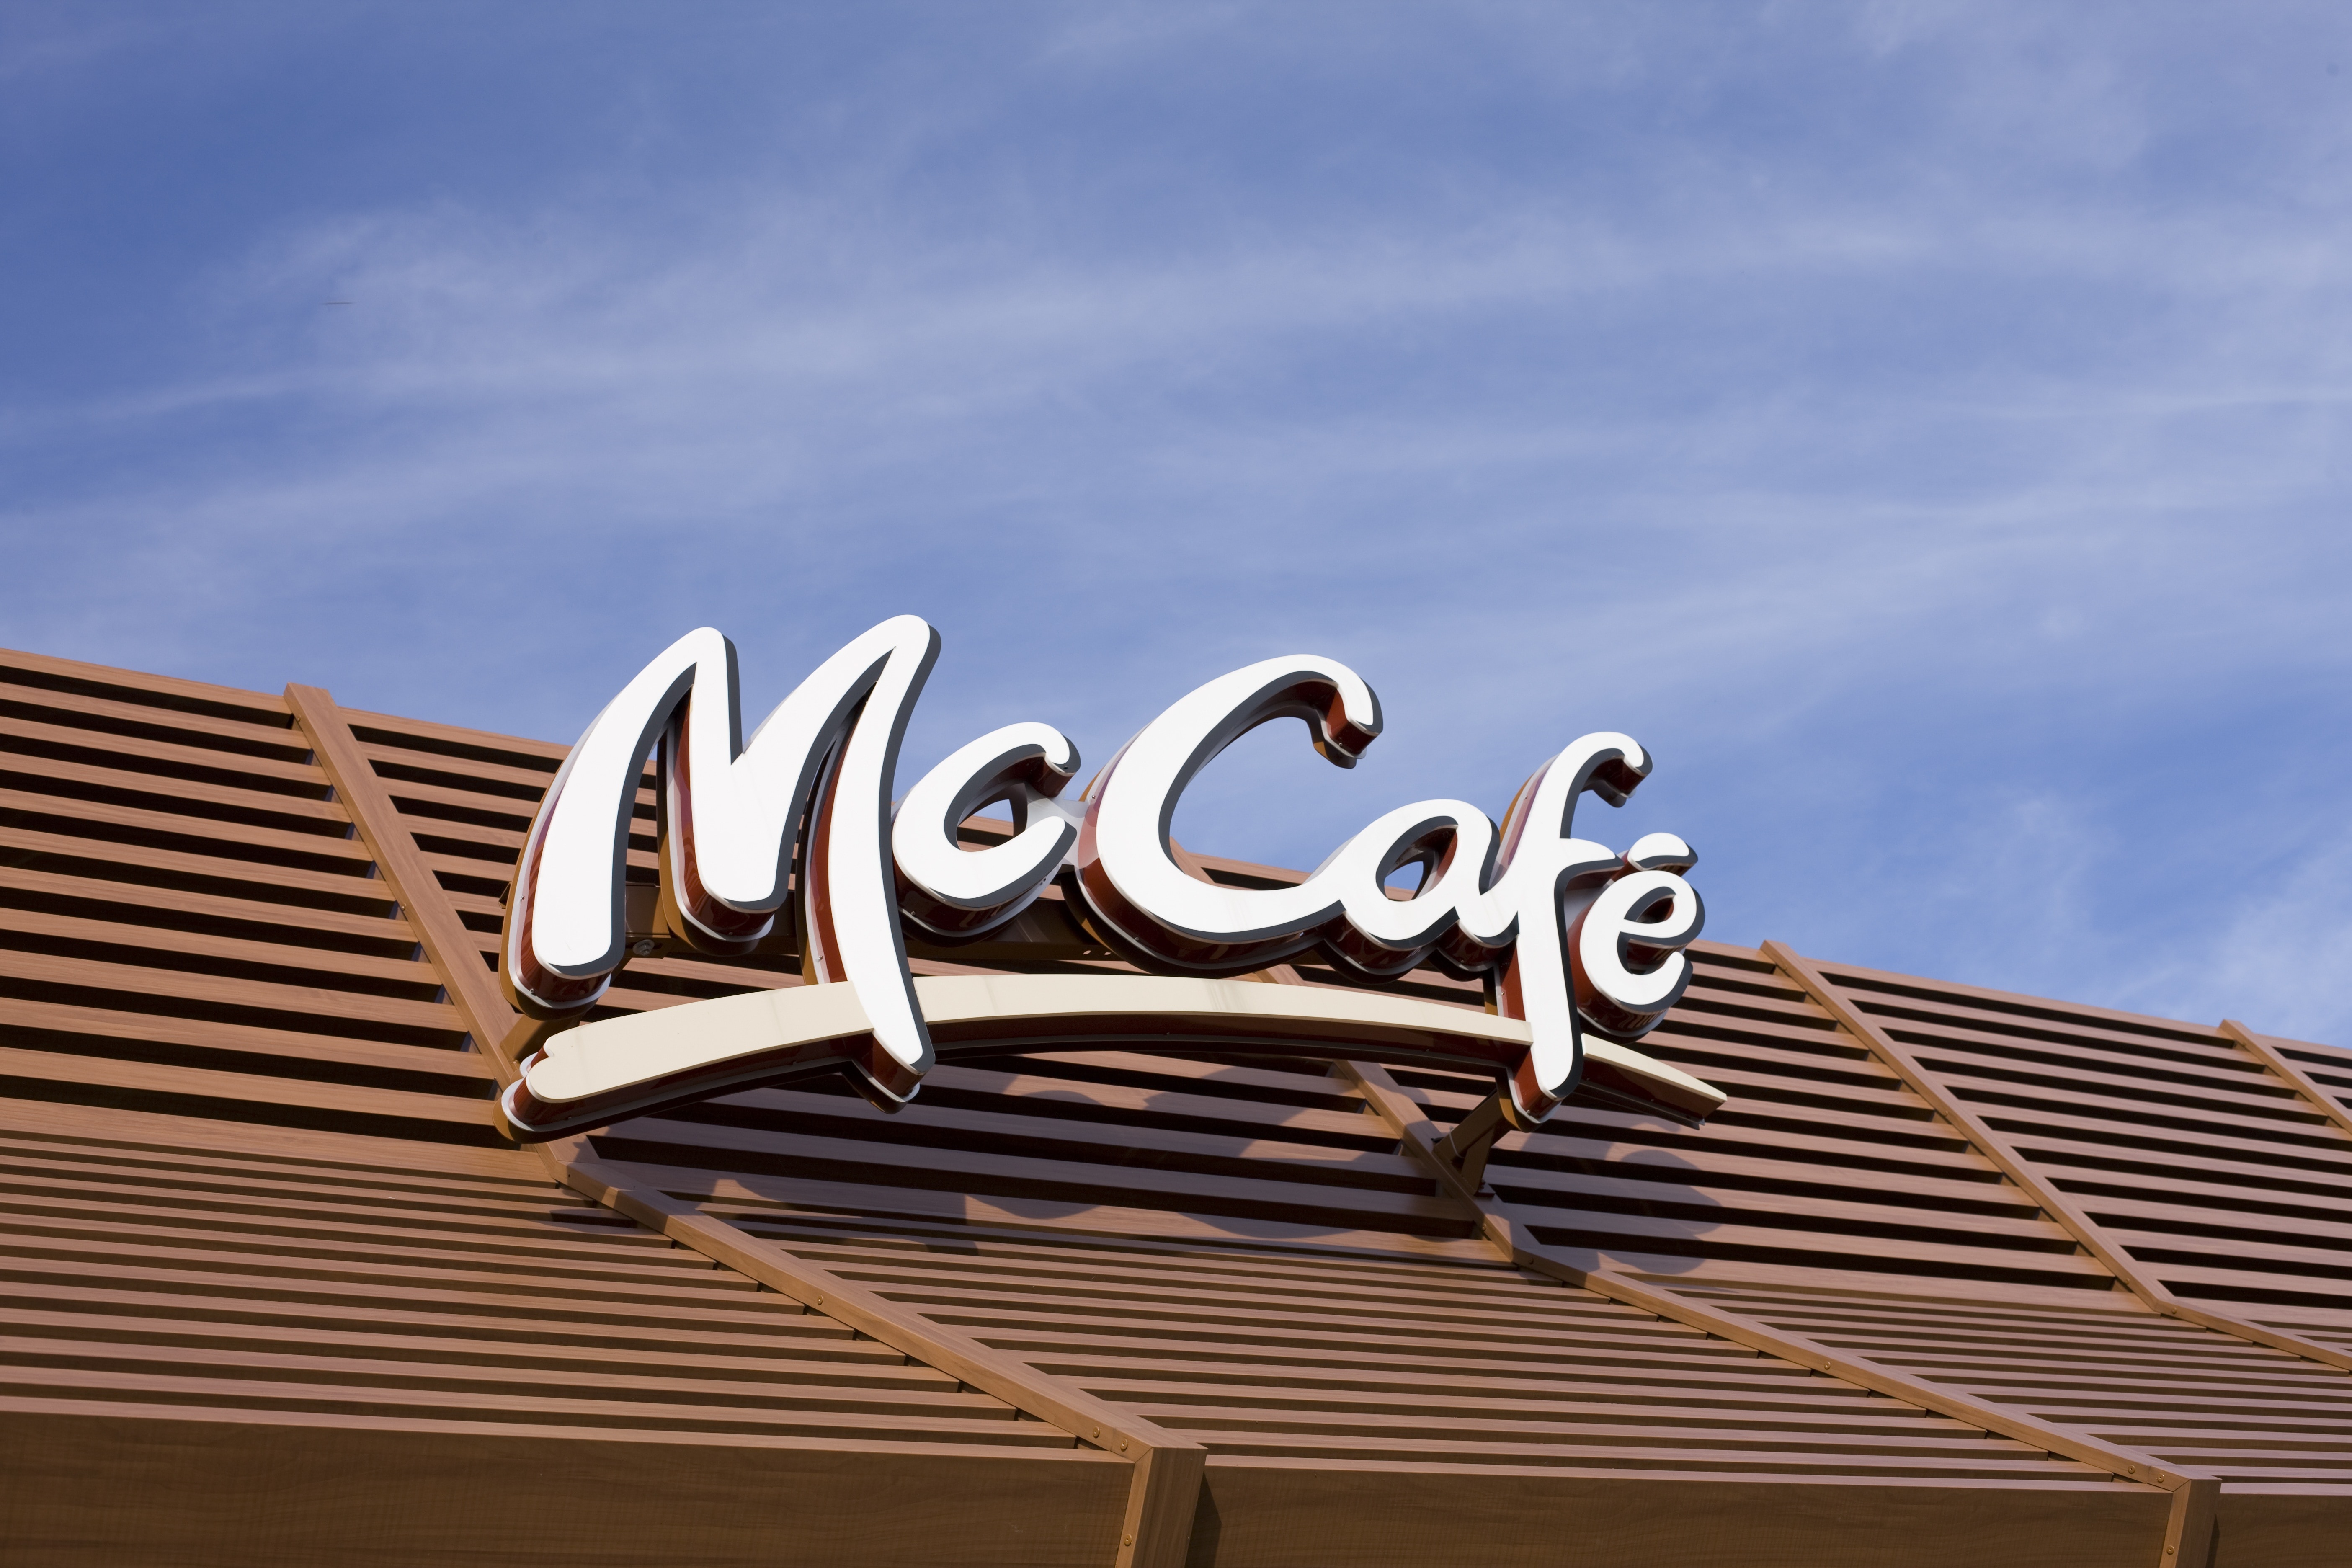 Editorial, Cafe, Mcdonalds, Mccafe, Roof, low angle view, no people